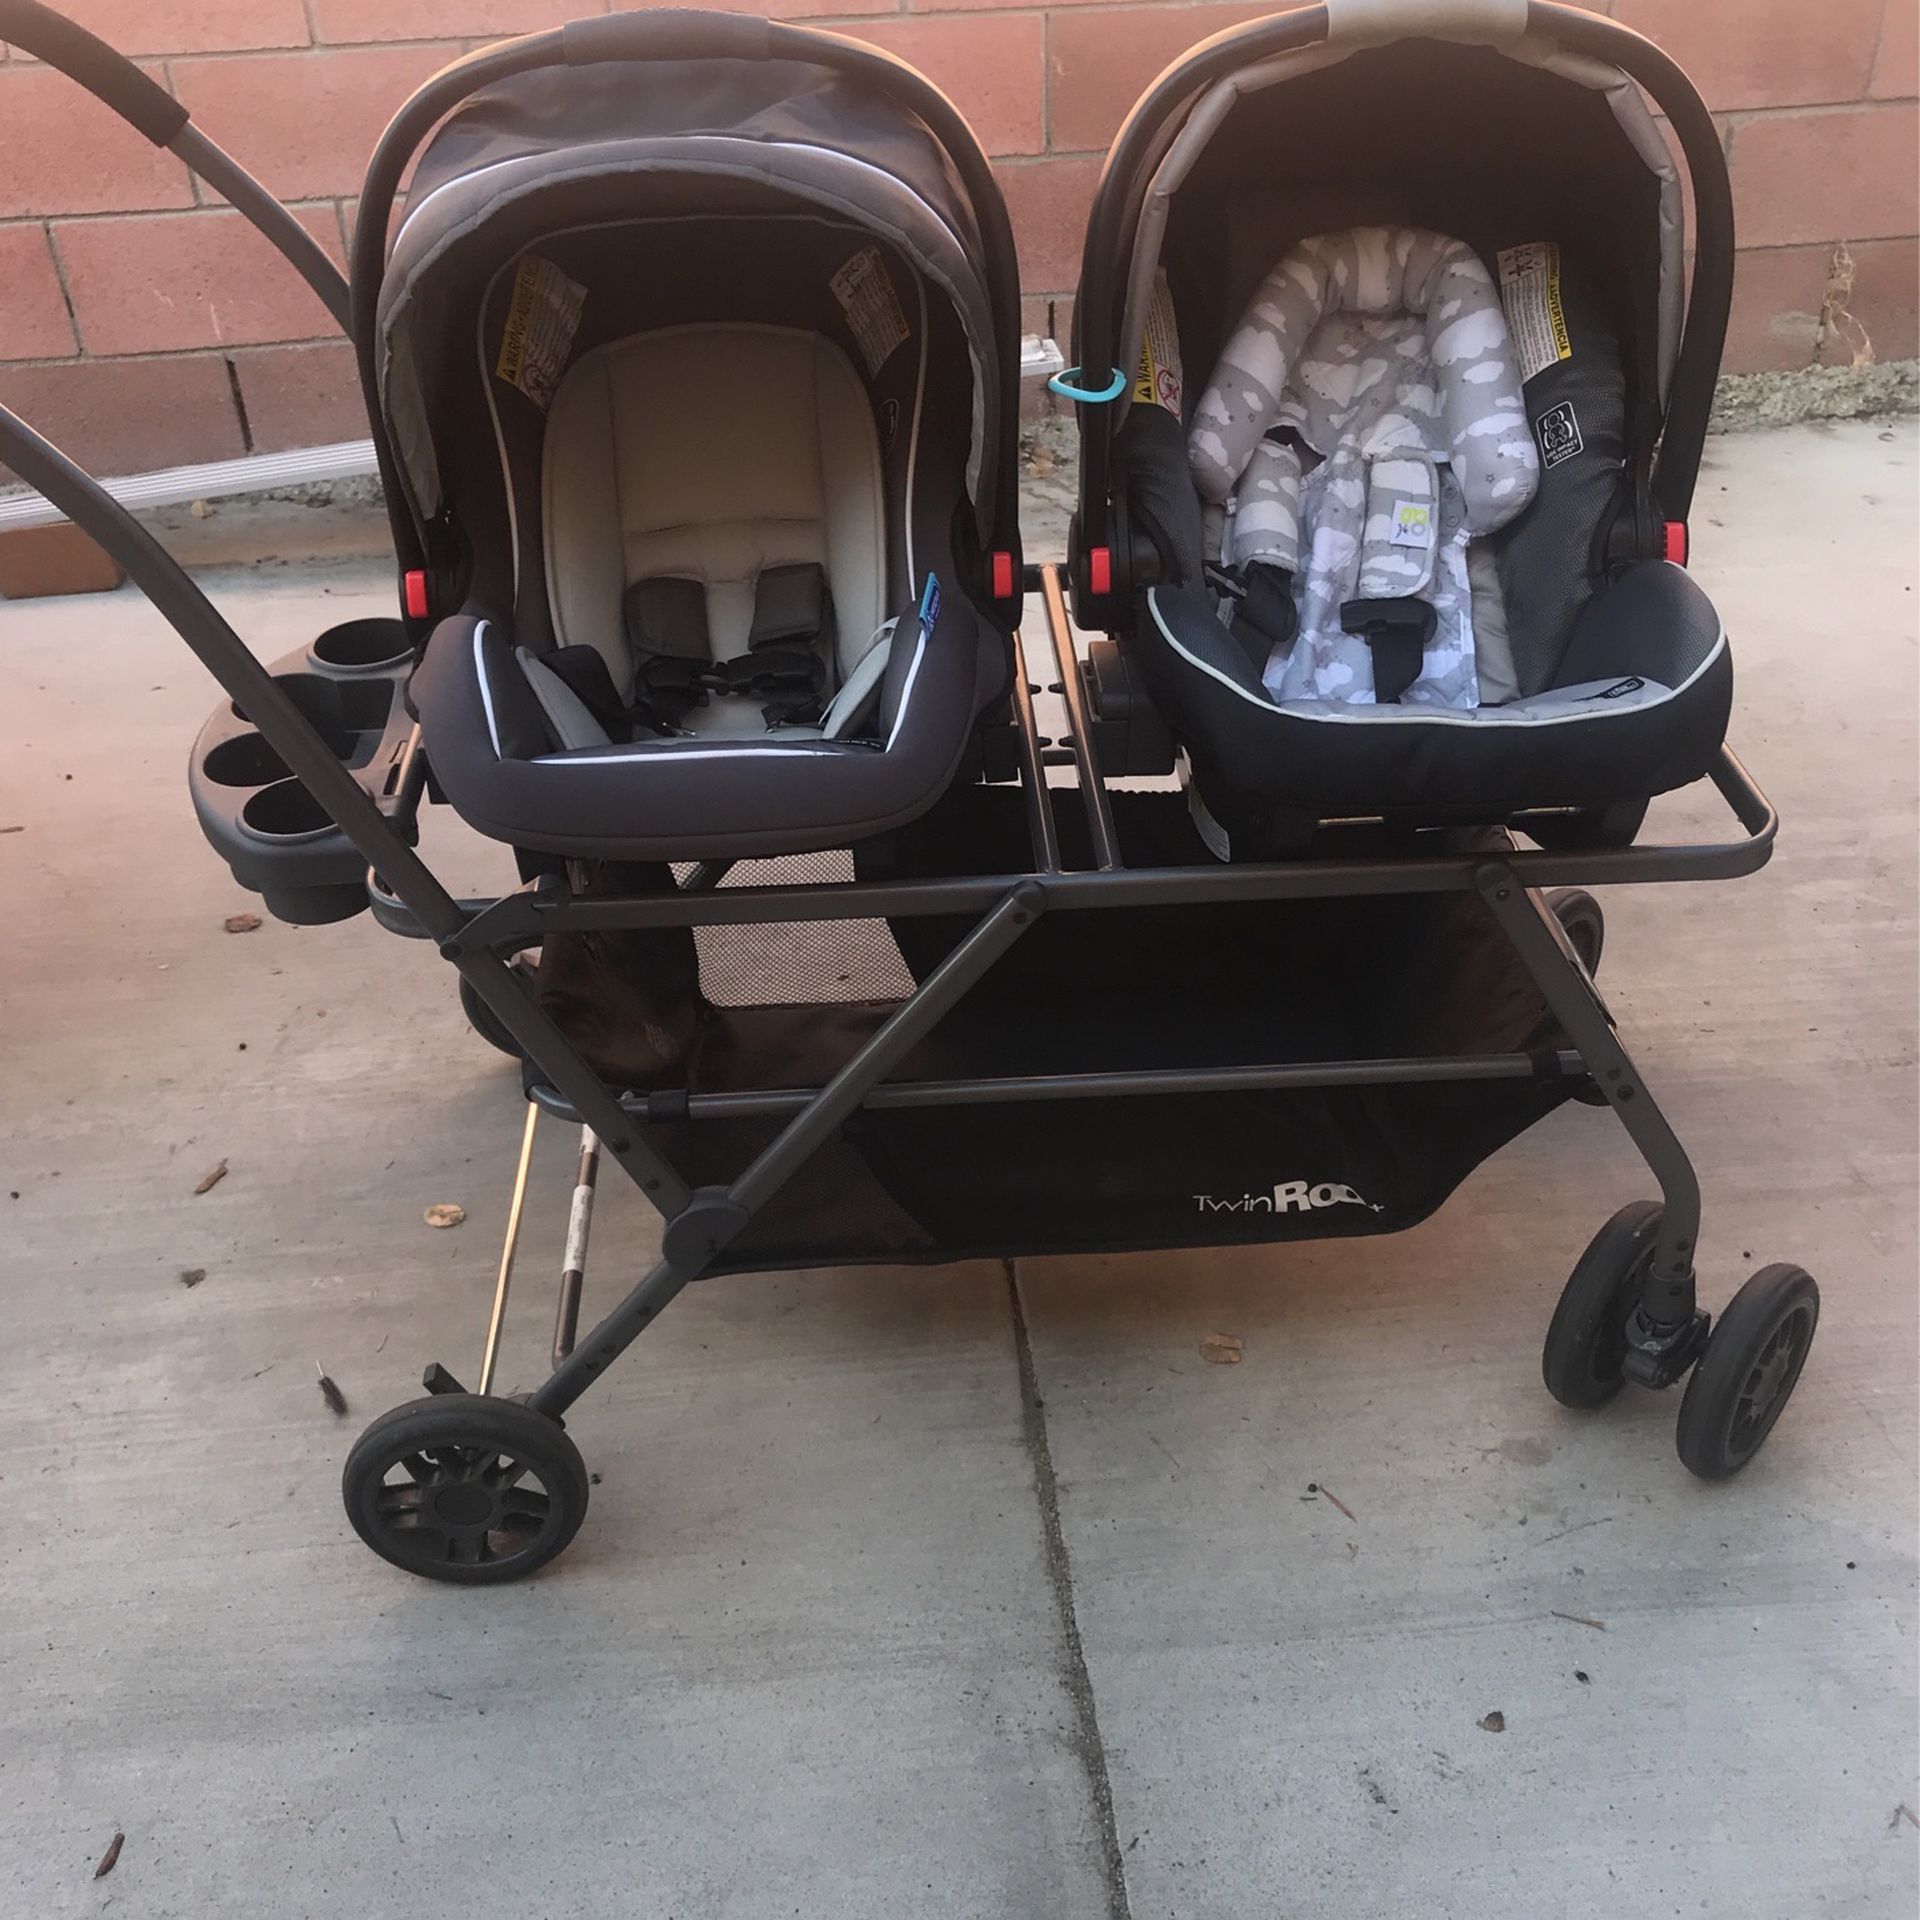 Joovy Twin Roo With Graco Car Seats And Adapter